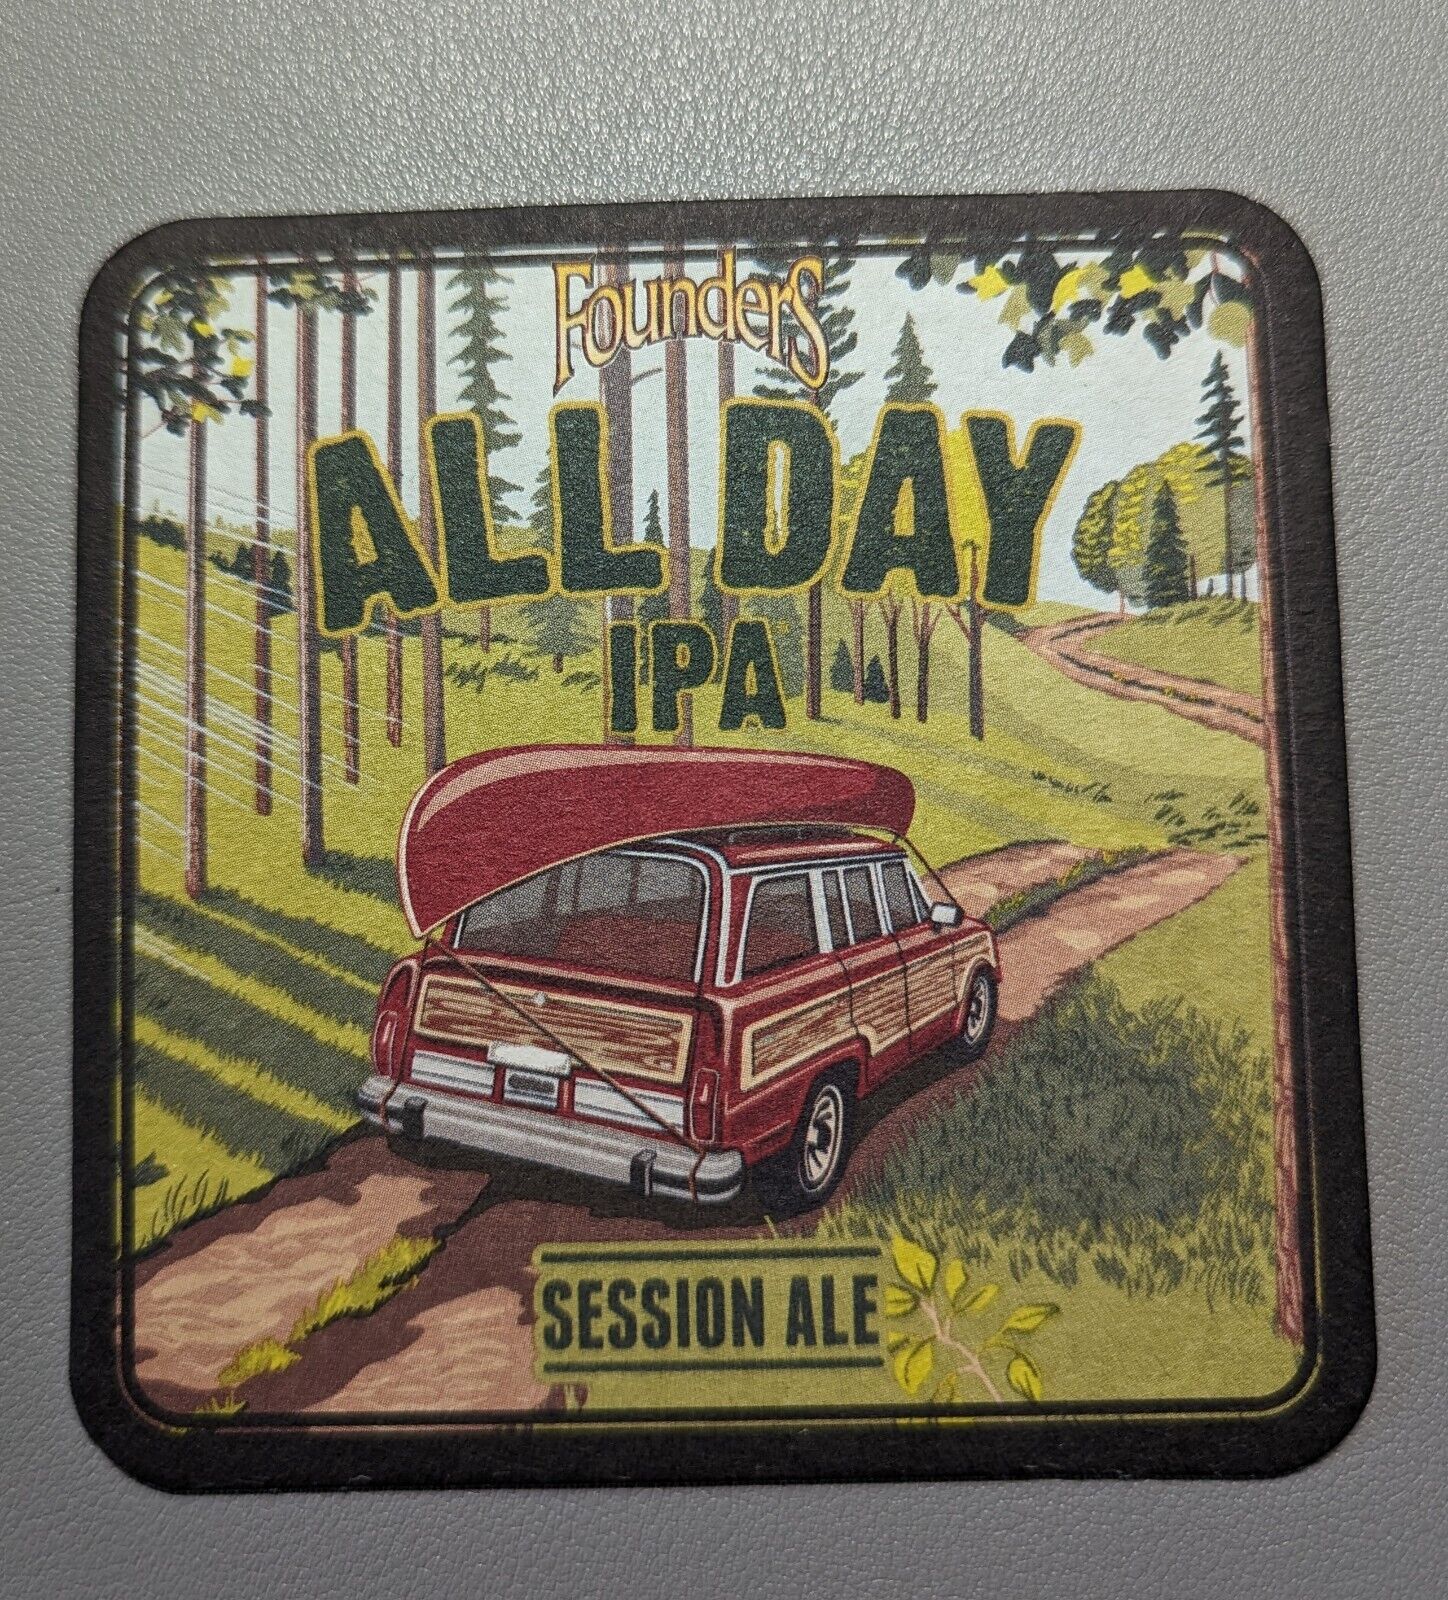 Beer Coaster Founders Brewery 2022 All Day IPA Grand Rapids Michigan 